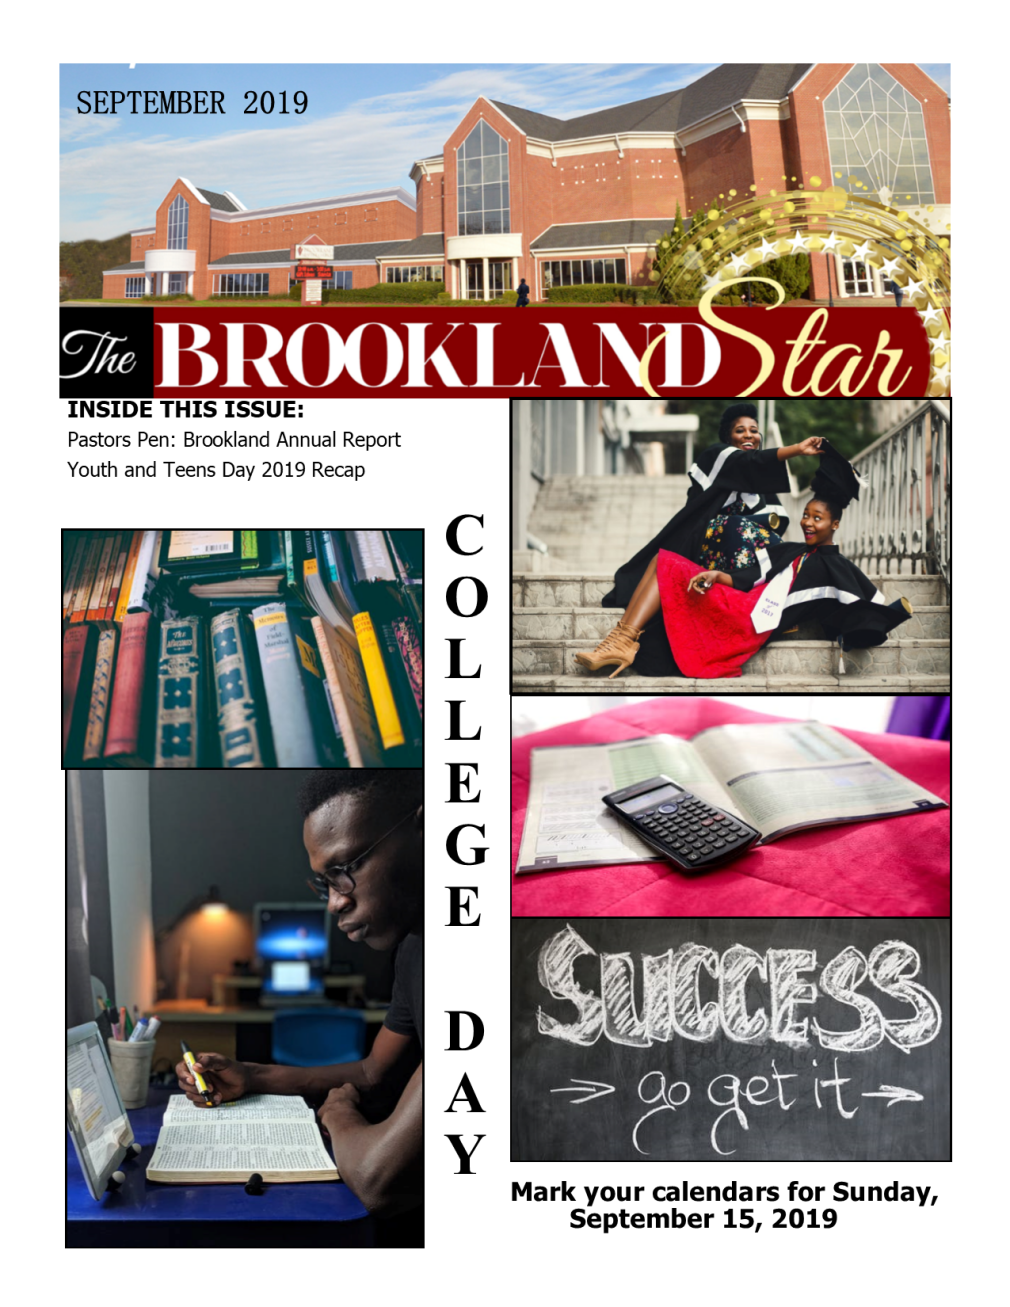 The Brookland Star September 2019 Edition